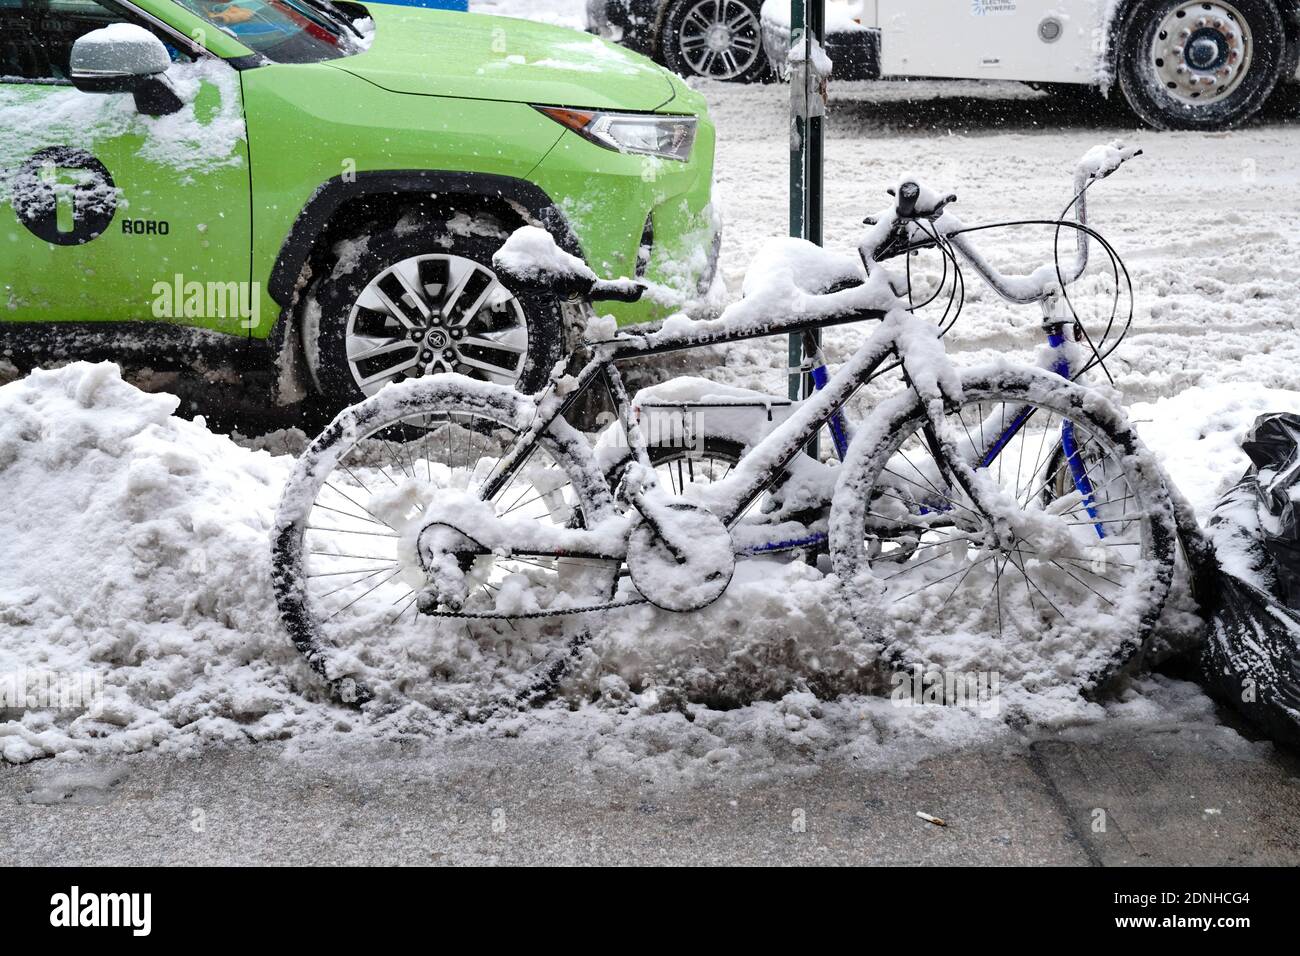 A view of snow-covered bicycles.The morning after a powerful winter storm hit the US northeastern states, a major snowstorm hit the US east coast during Thursday's early hours, creating extra challenges in the midst of a coronavirus pandemic and a mass vaccination rollout taking place across the region. The winter storm, moving over New York, Pennsylvania and other northeastern states, leaves millions facing more than a foot of snow a week before Christmas, potentially disrupting coronavirus testing and delaying holiday deliveries. It also left more than 60 million people under bad weather war Stock Photo